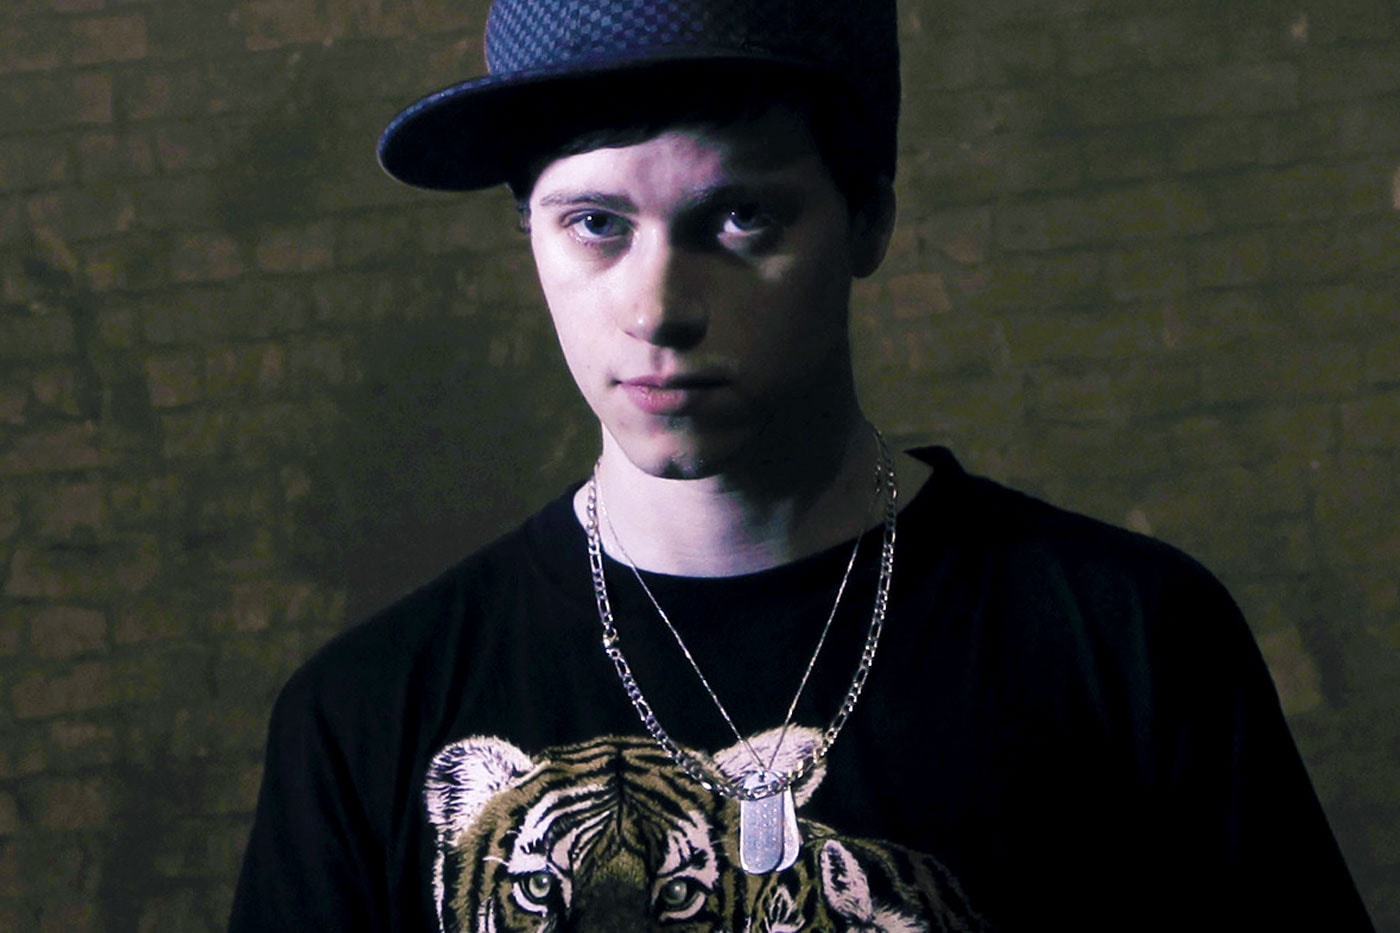 Rustie Releases New Song From a Hospital "160 Hospital Riddim"